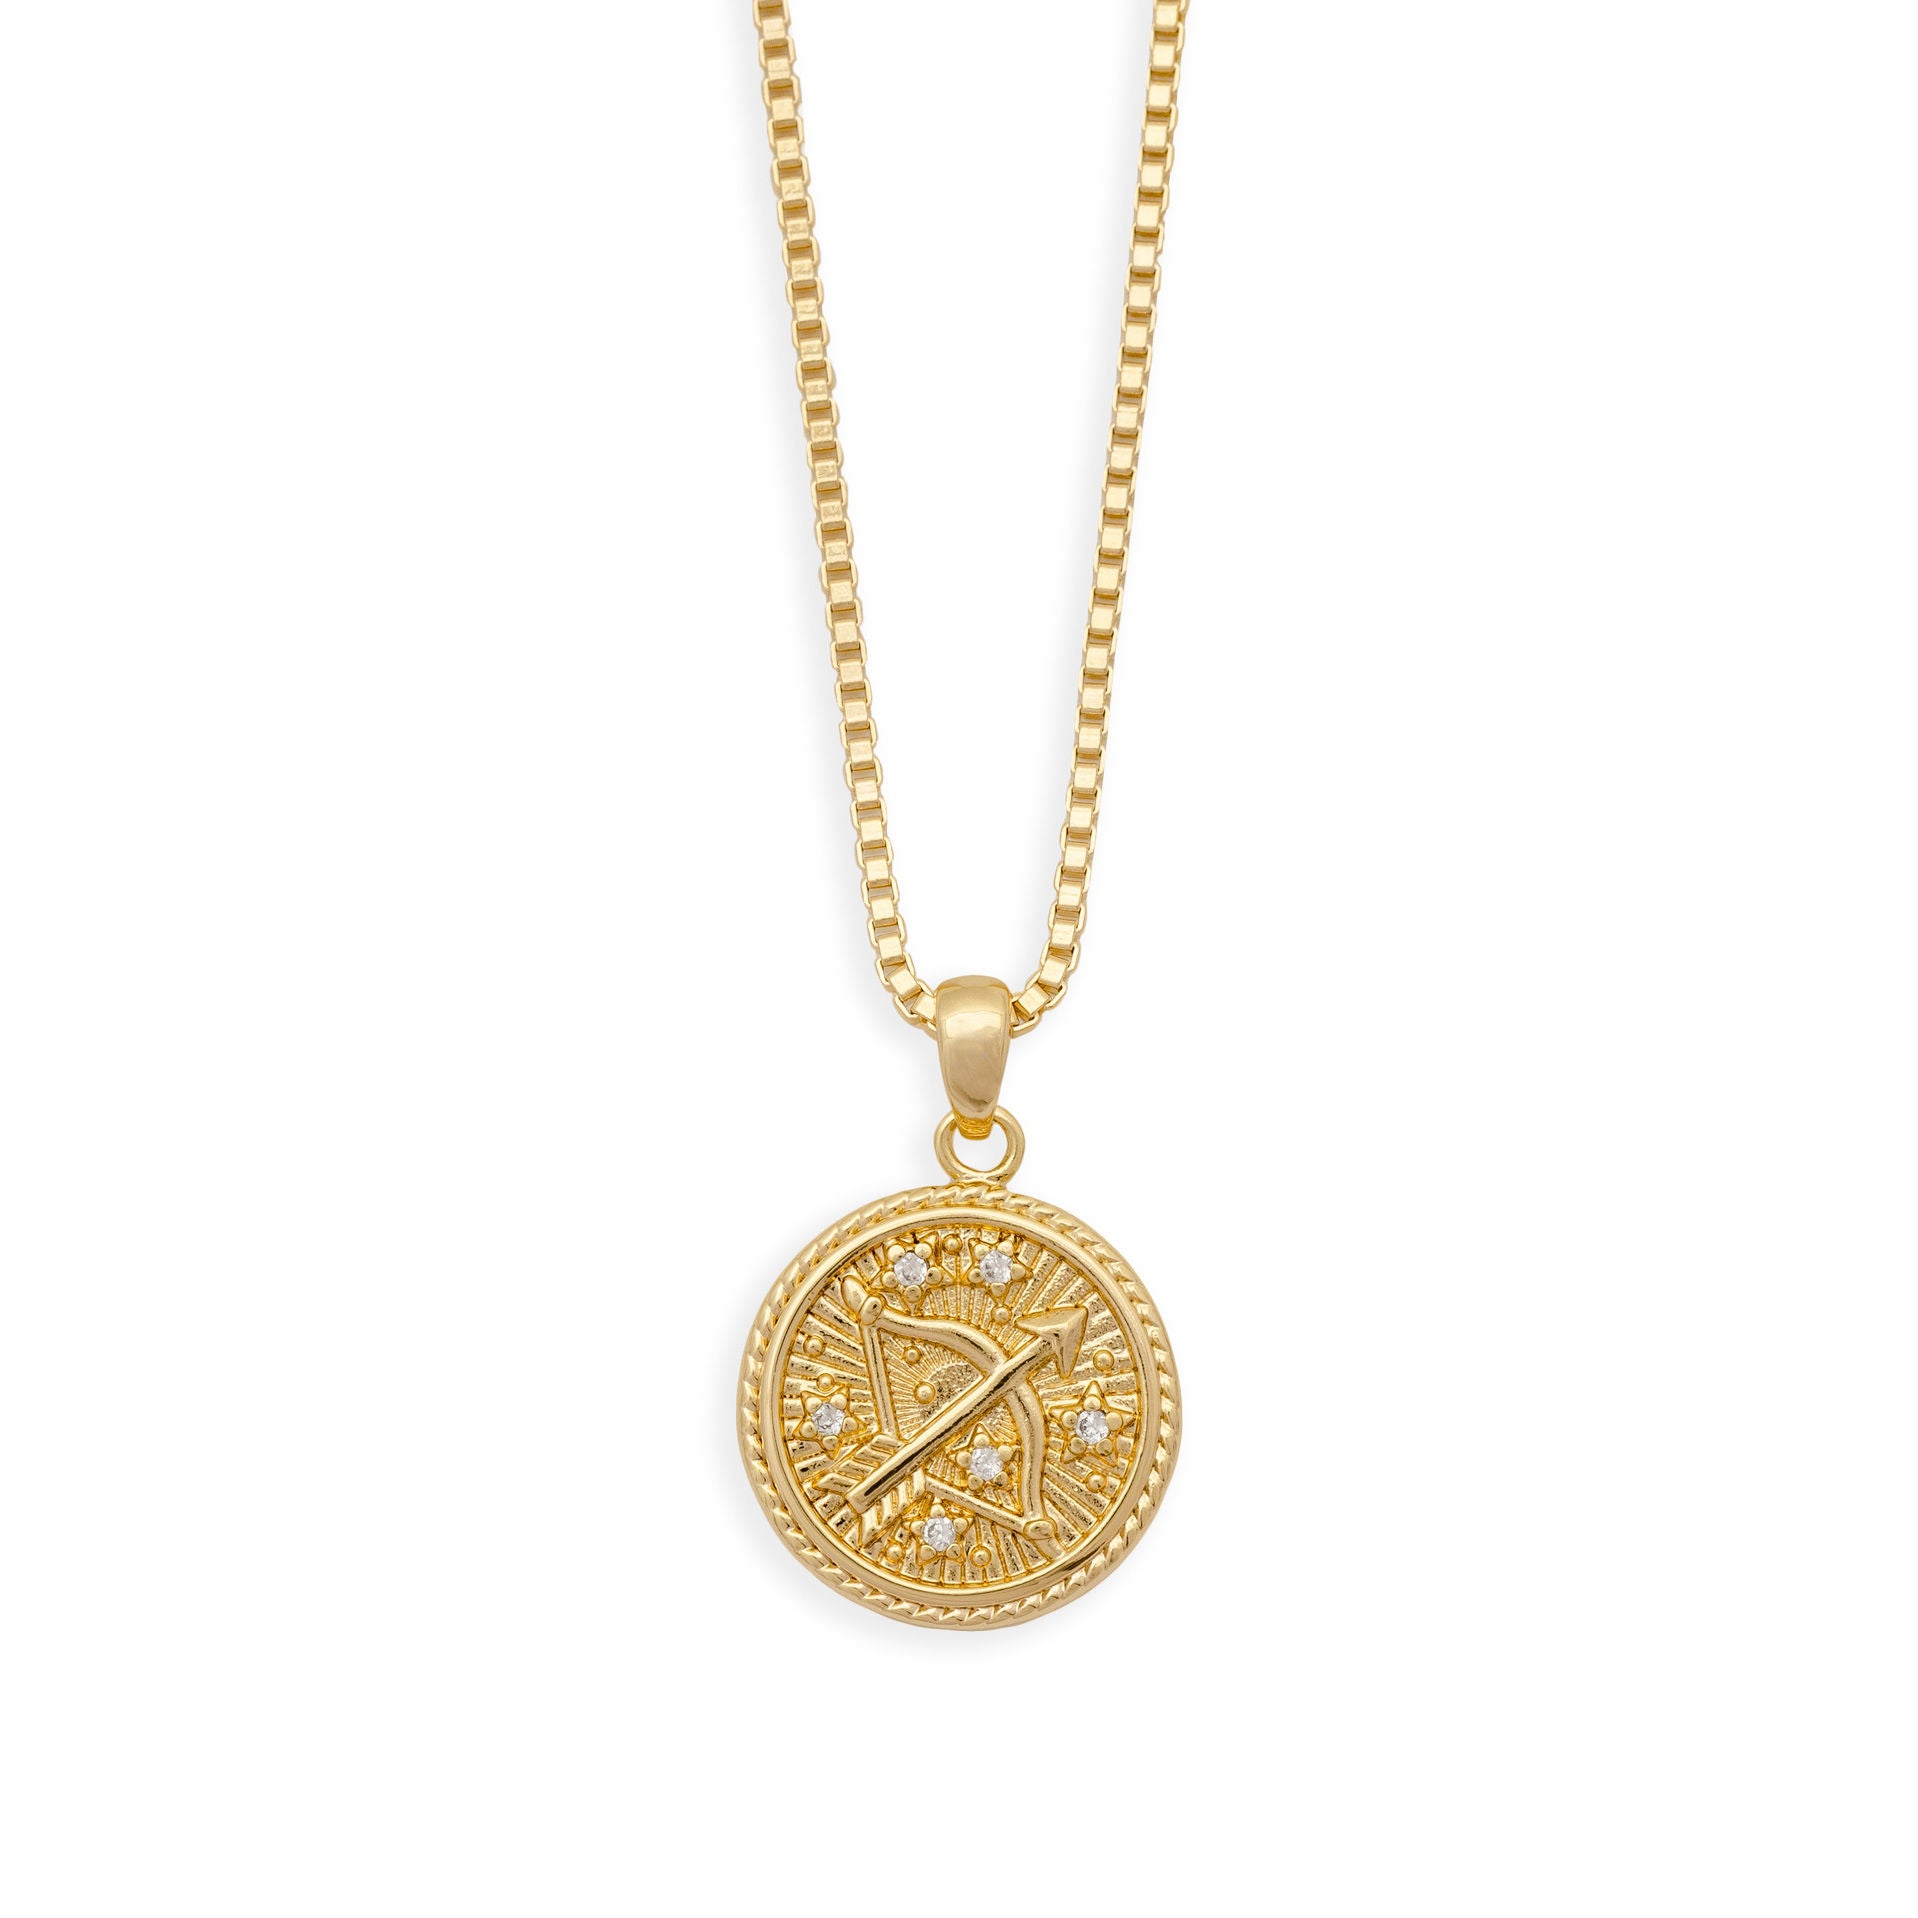 In the Stars Zodiac Necklace - Sagittarius from Erin Fader Jewelry